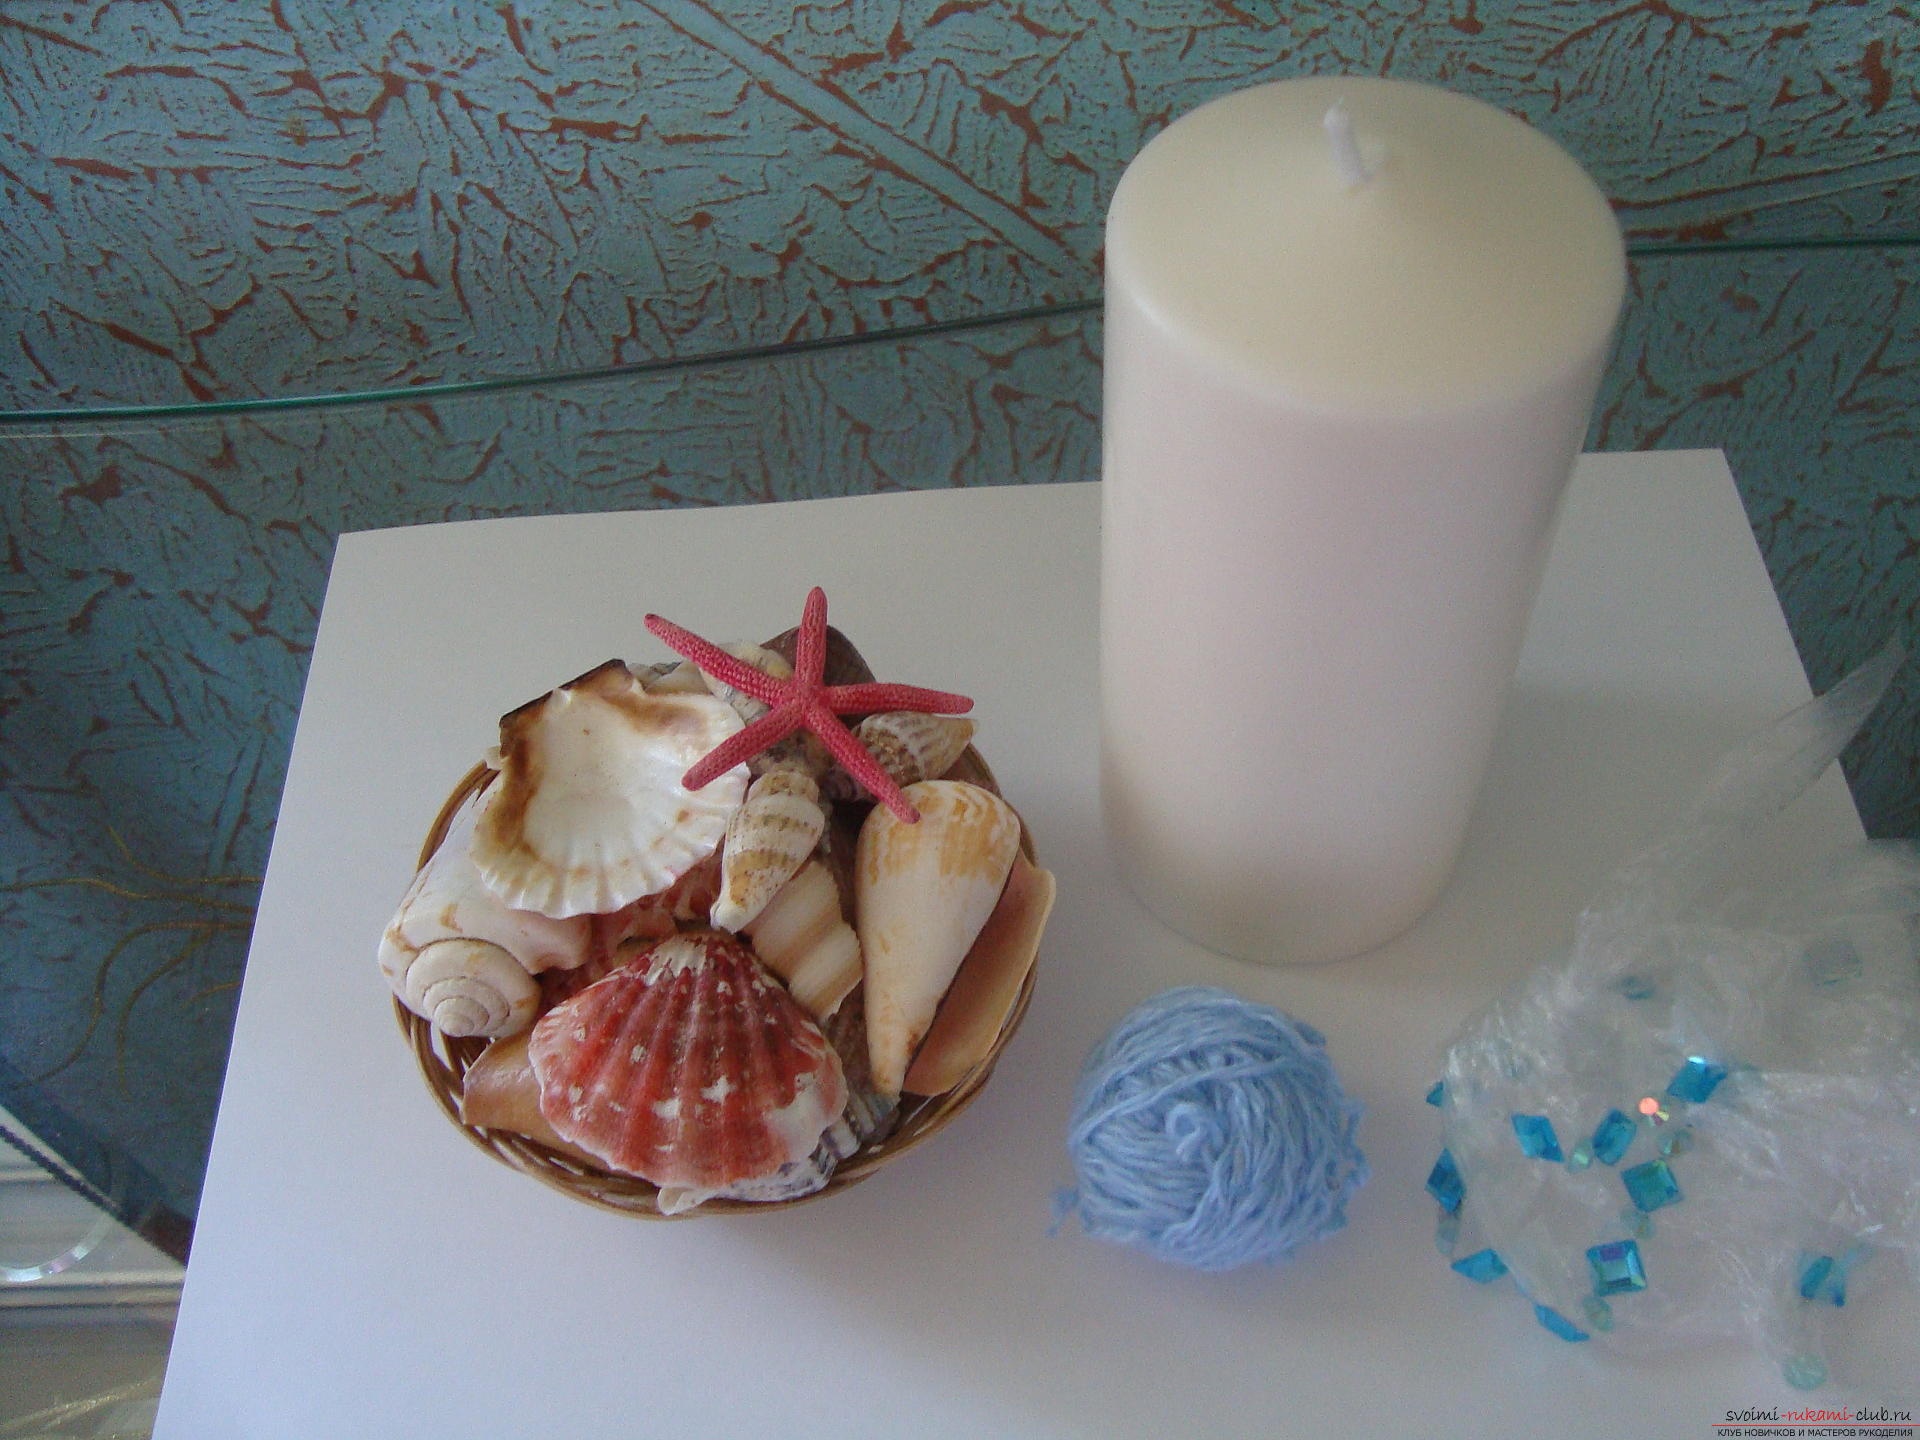 Step-by-step photos on the creation of a decorative candle. Photo # 2